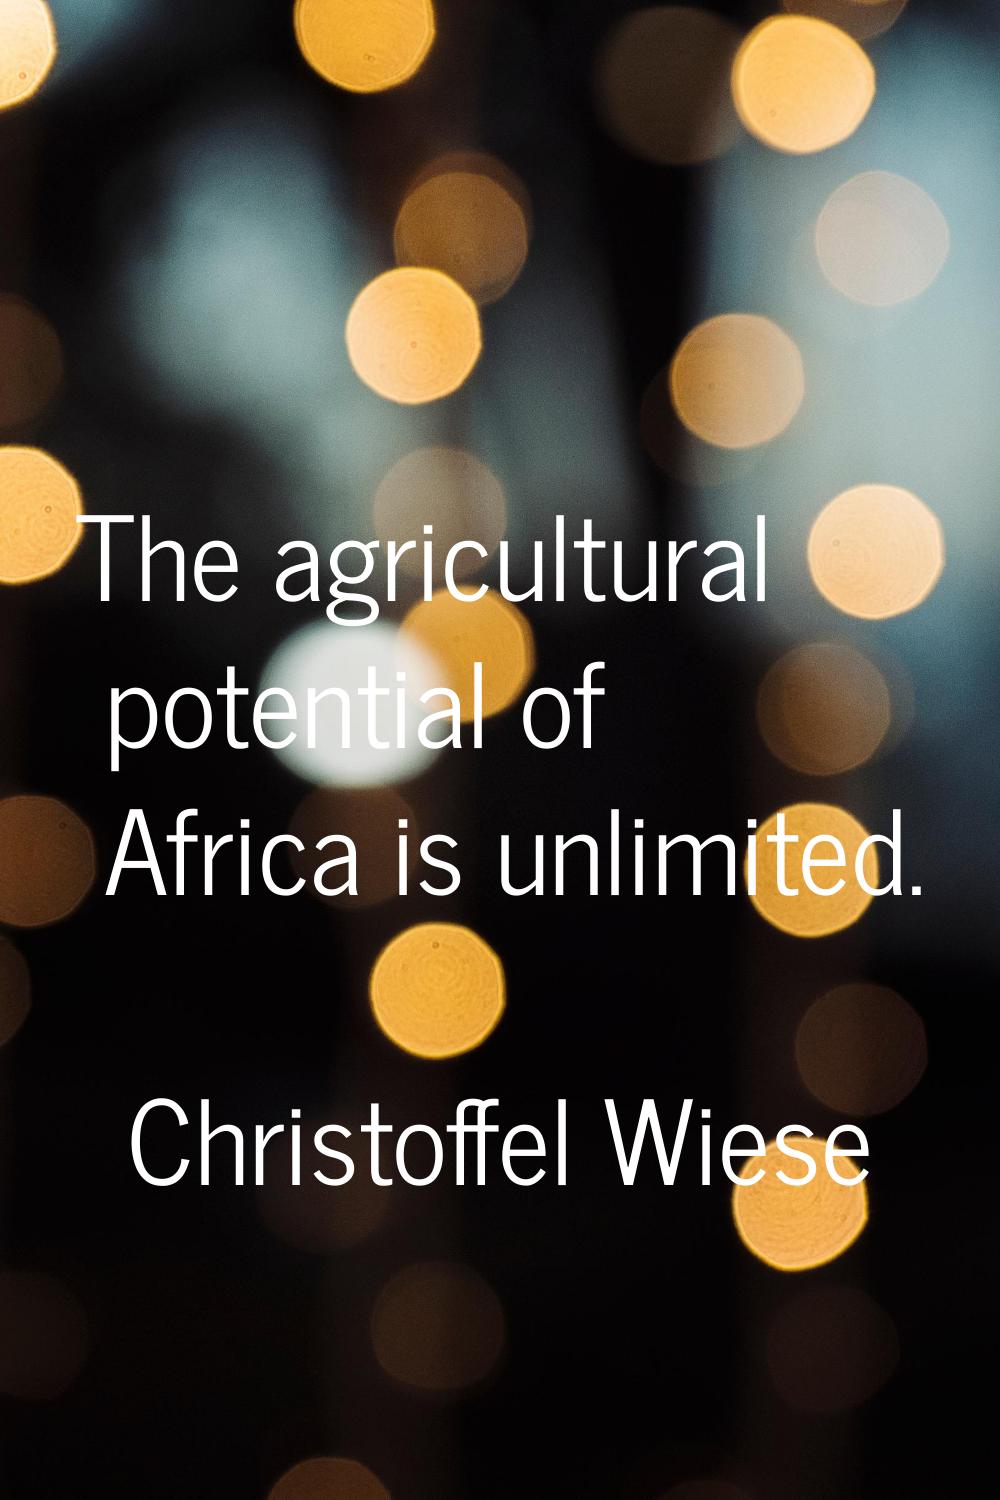 The agricultural potential of Africa is unlimited.